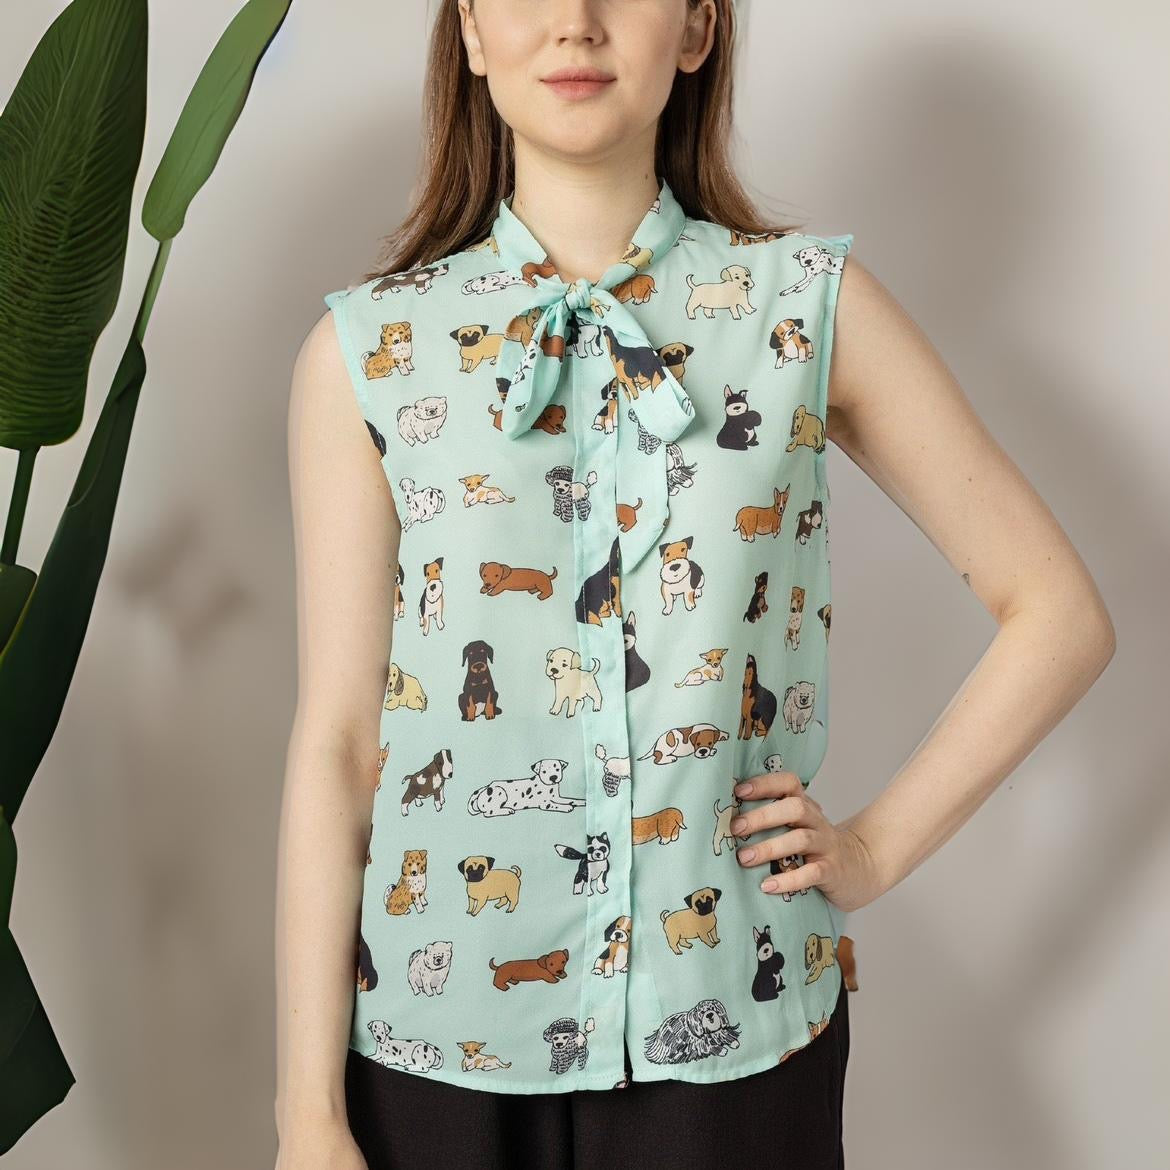 Chiffon Sleeveless Bow Tie Collar Button Down Blouse Shirt for Work Casual Tops